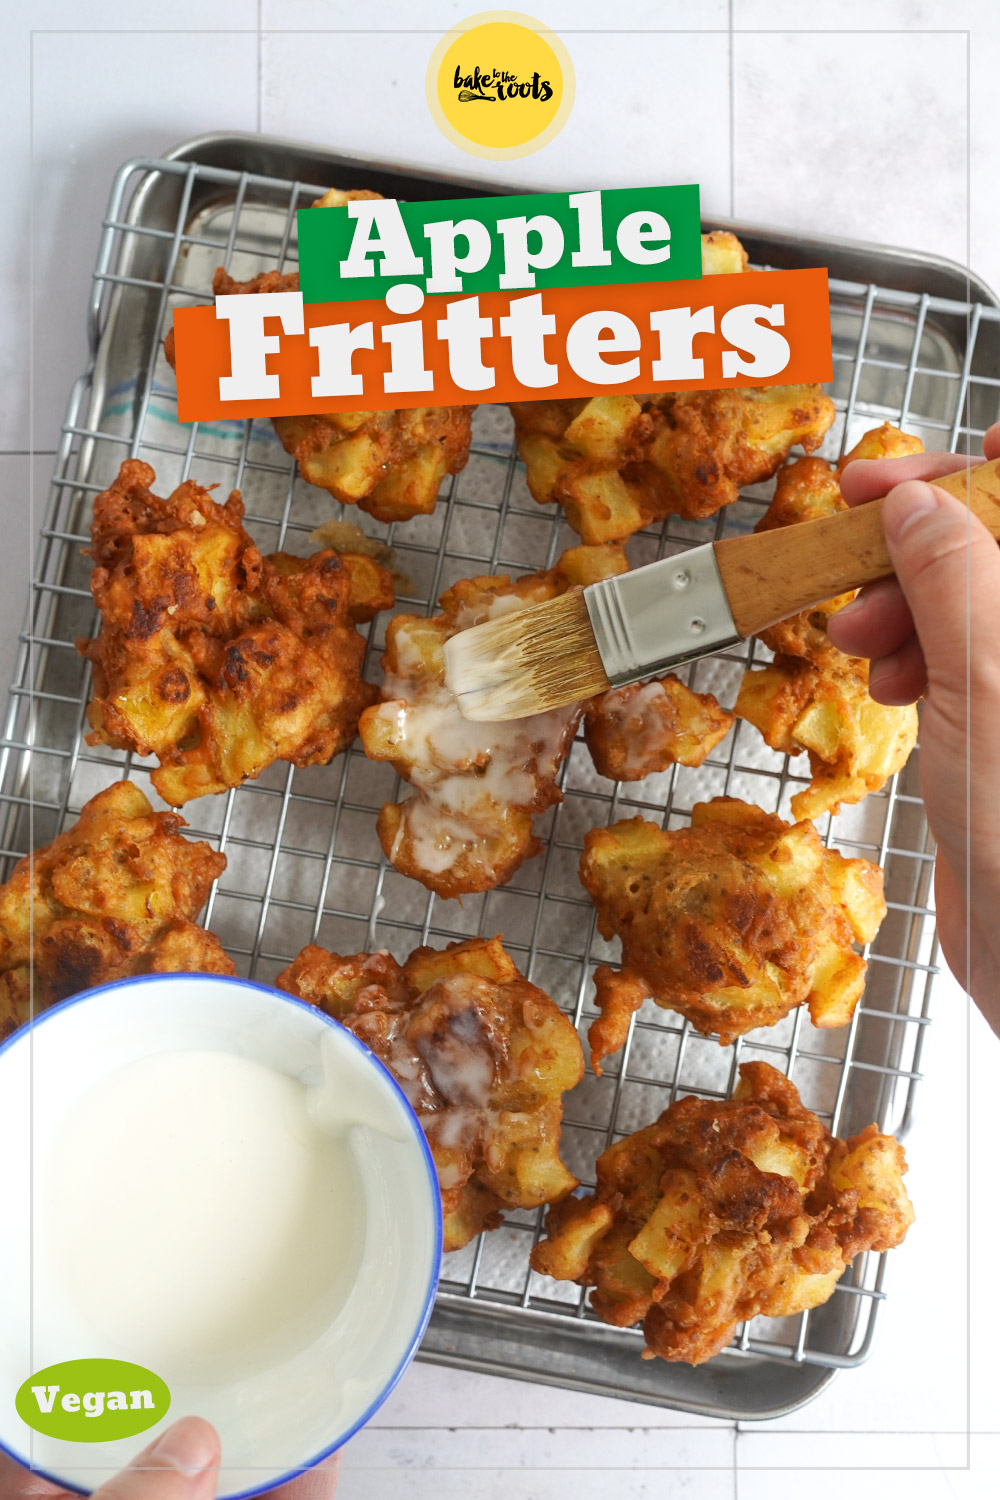 Vegane Apple Fritters (Apfelküchlein) | Bake to the roots